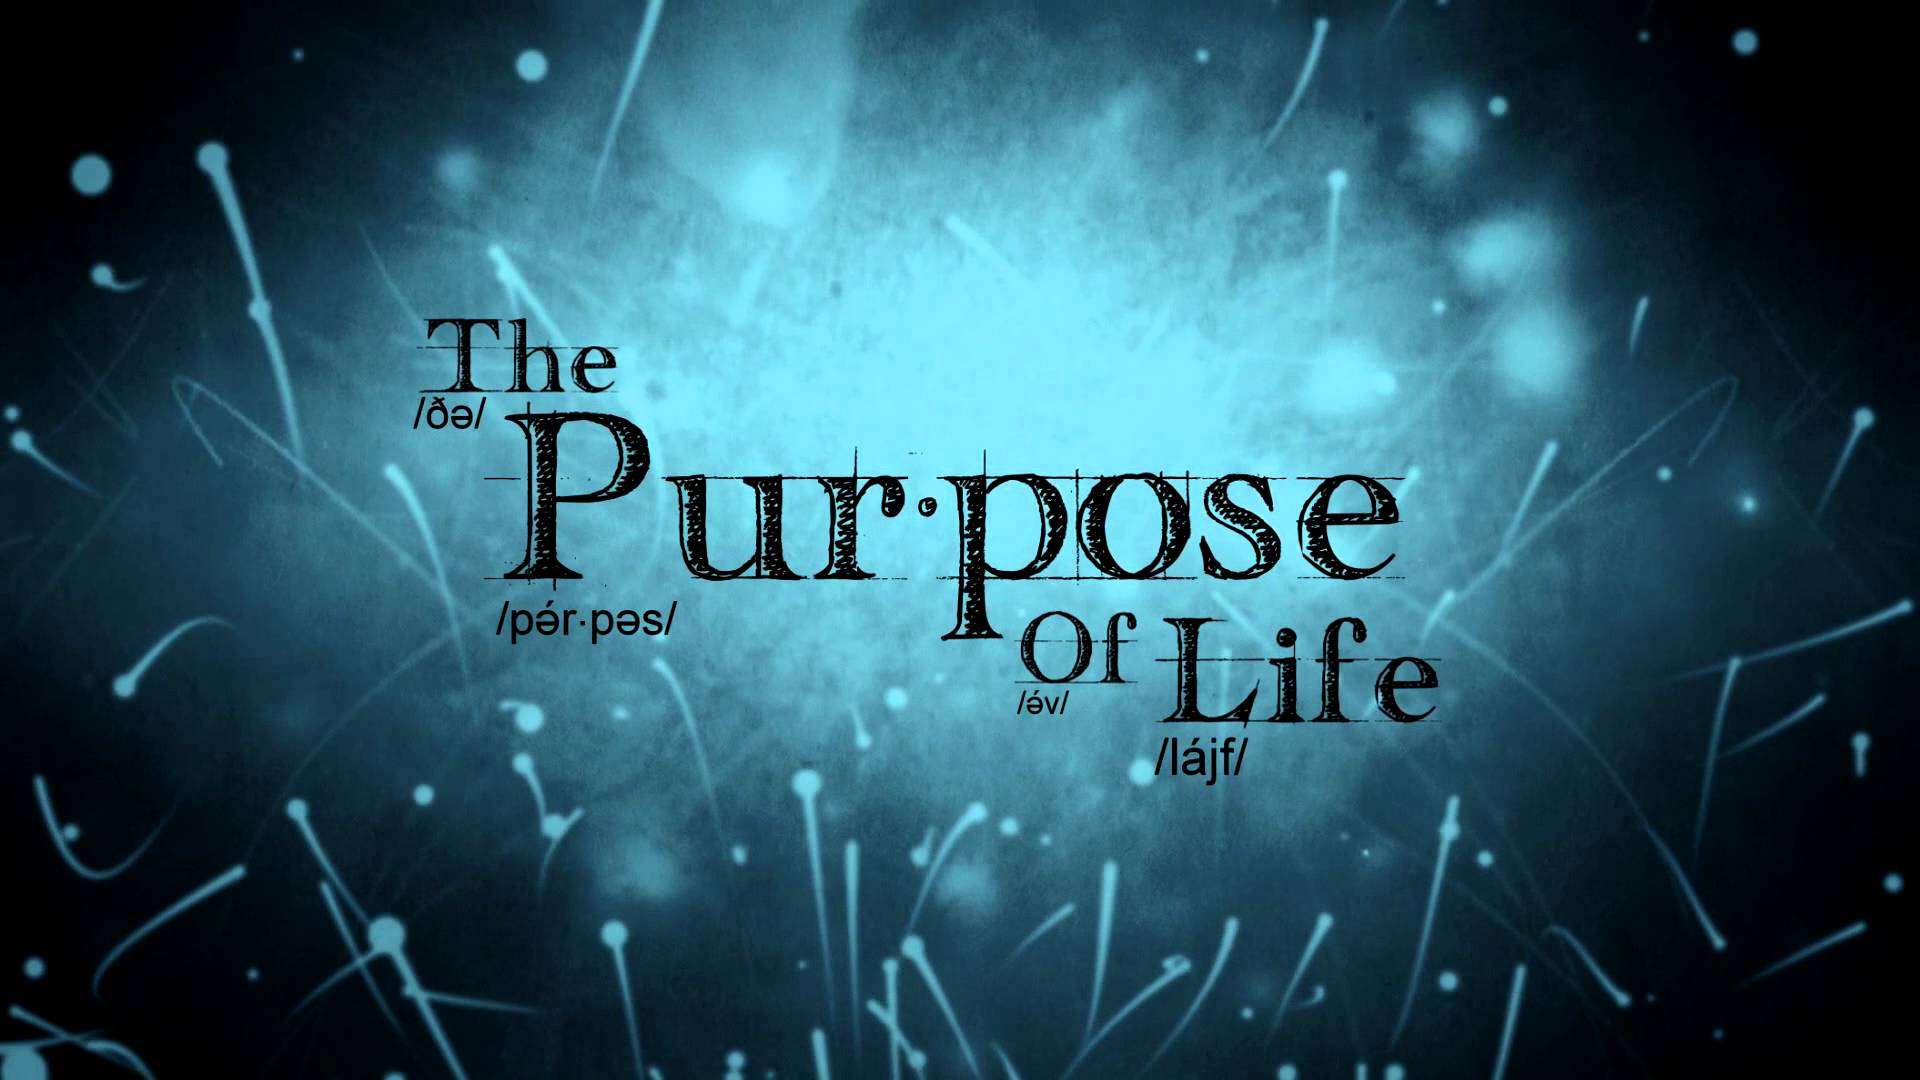 Purpose of life is